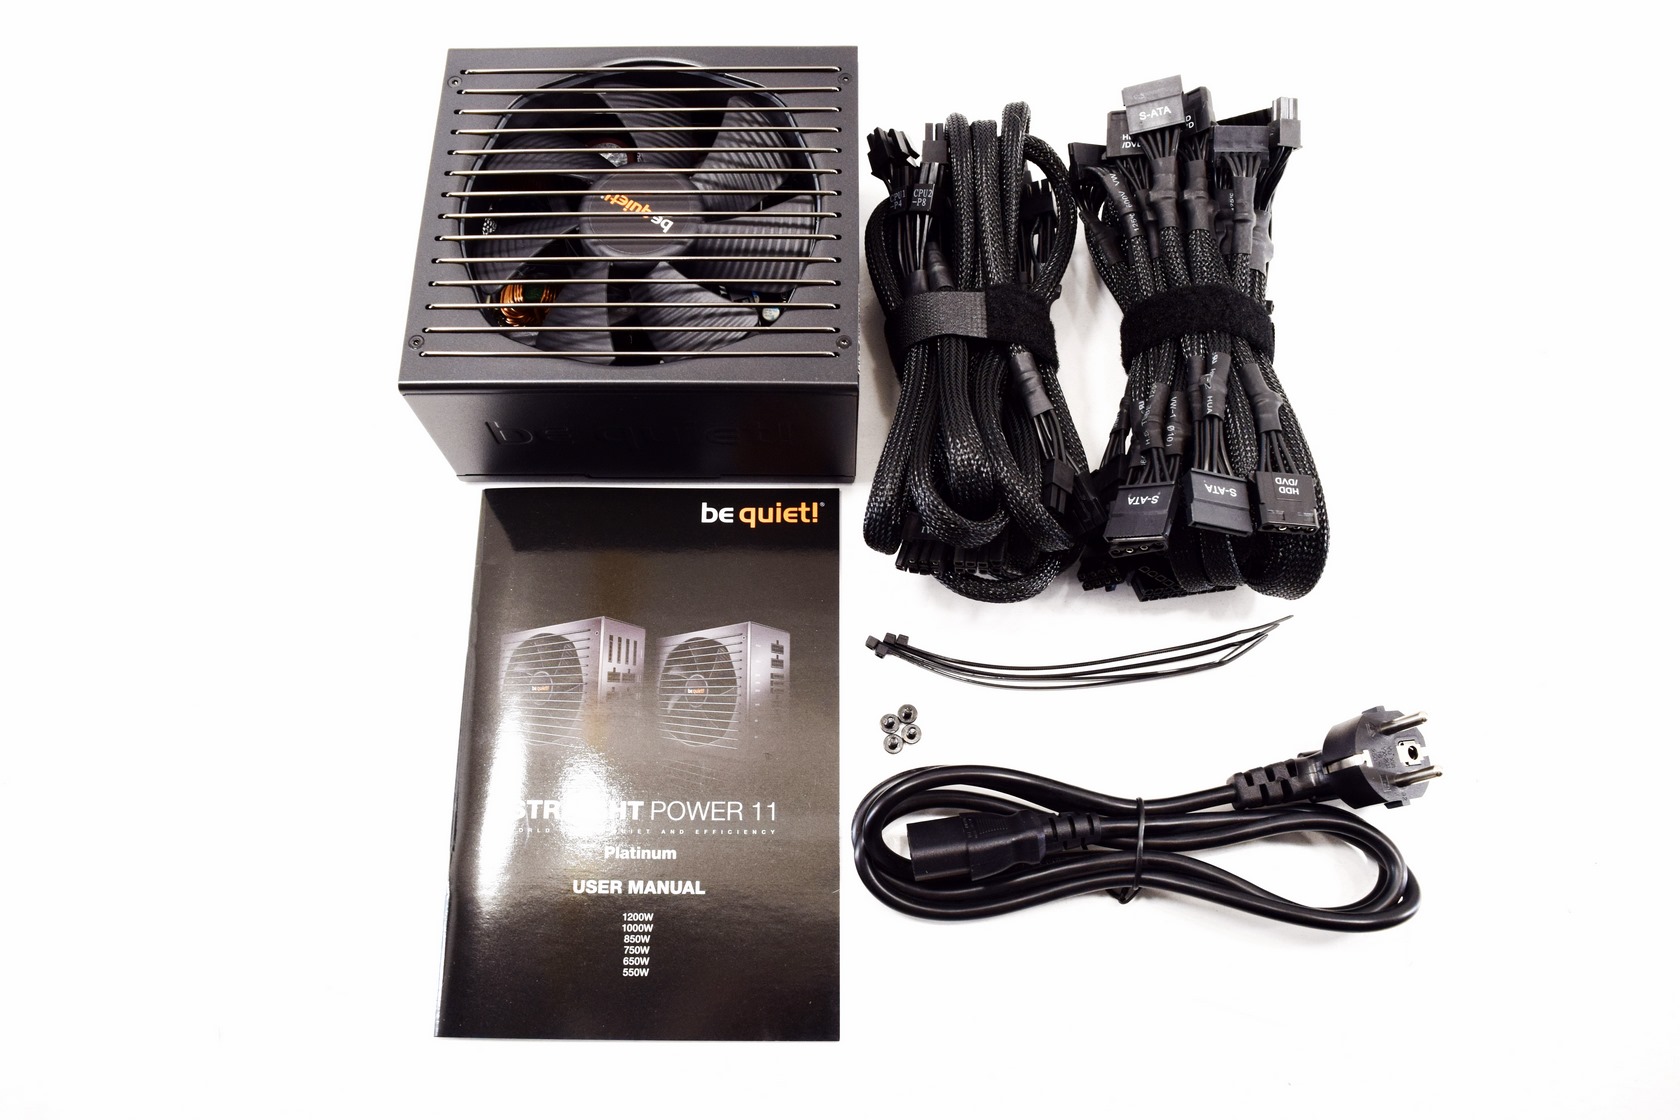 be quiet! Straight Power 11 750W Quiet Performance Power Supply | Fully  Modular | 80 Plus Gold | BN619